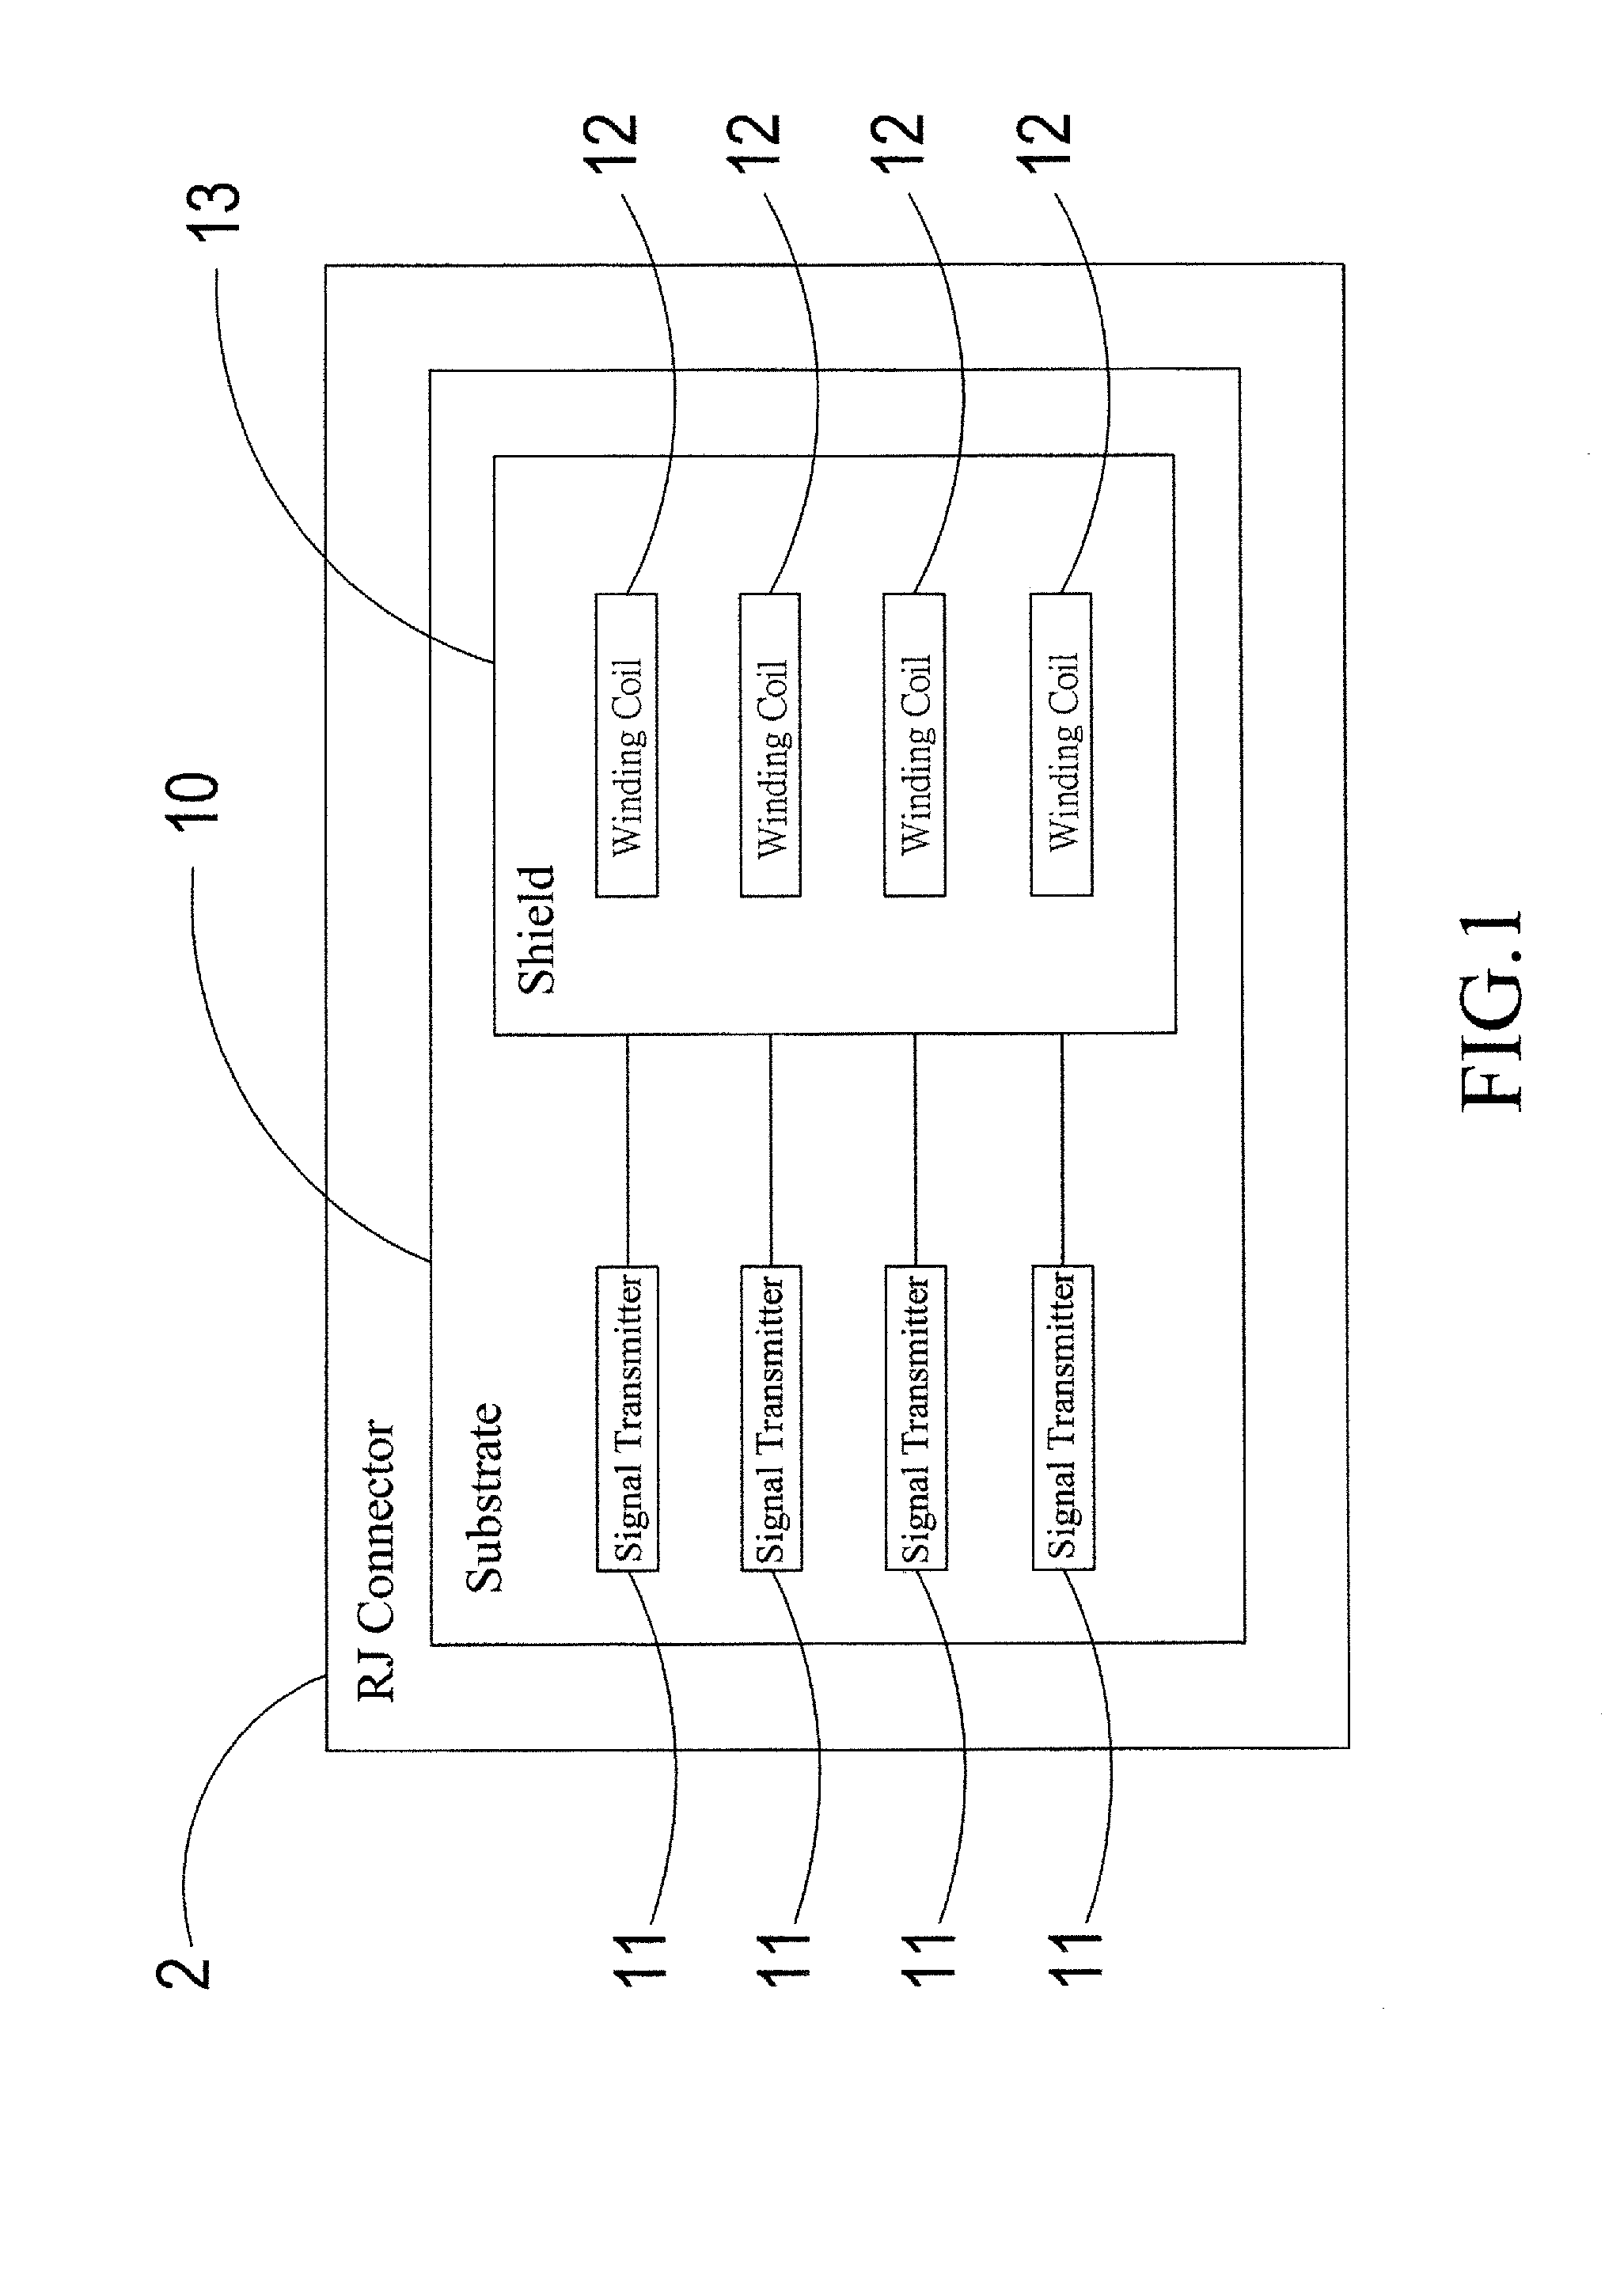 Signal transmission apparatus of connector